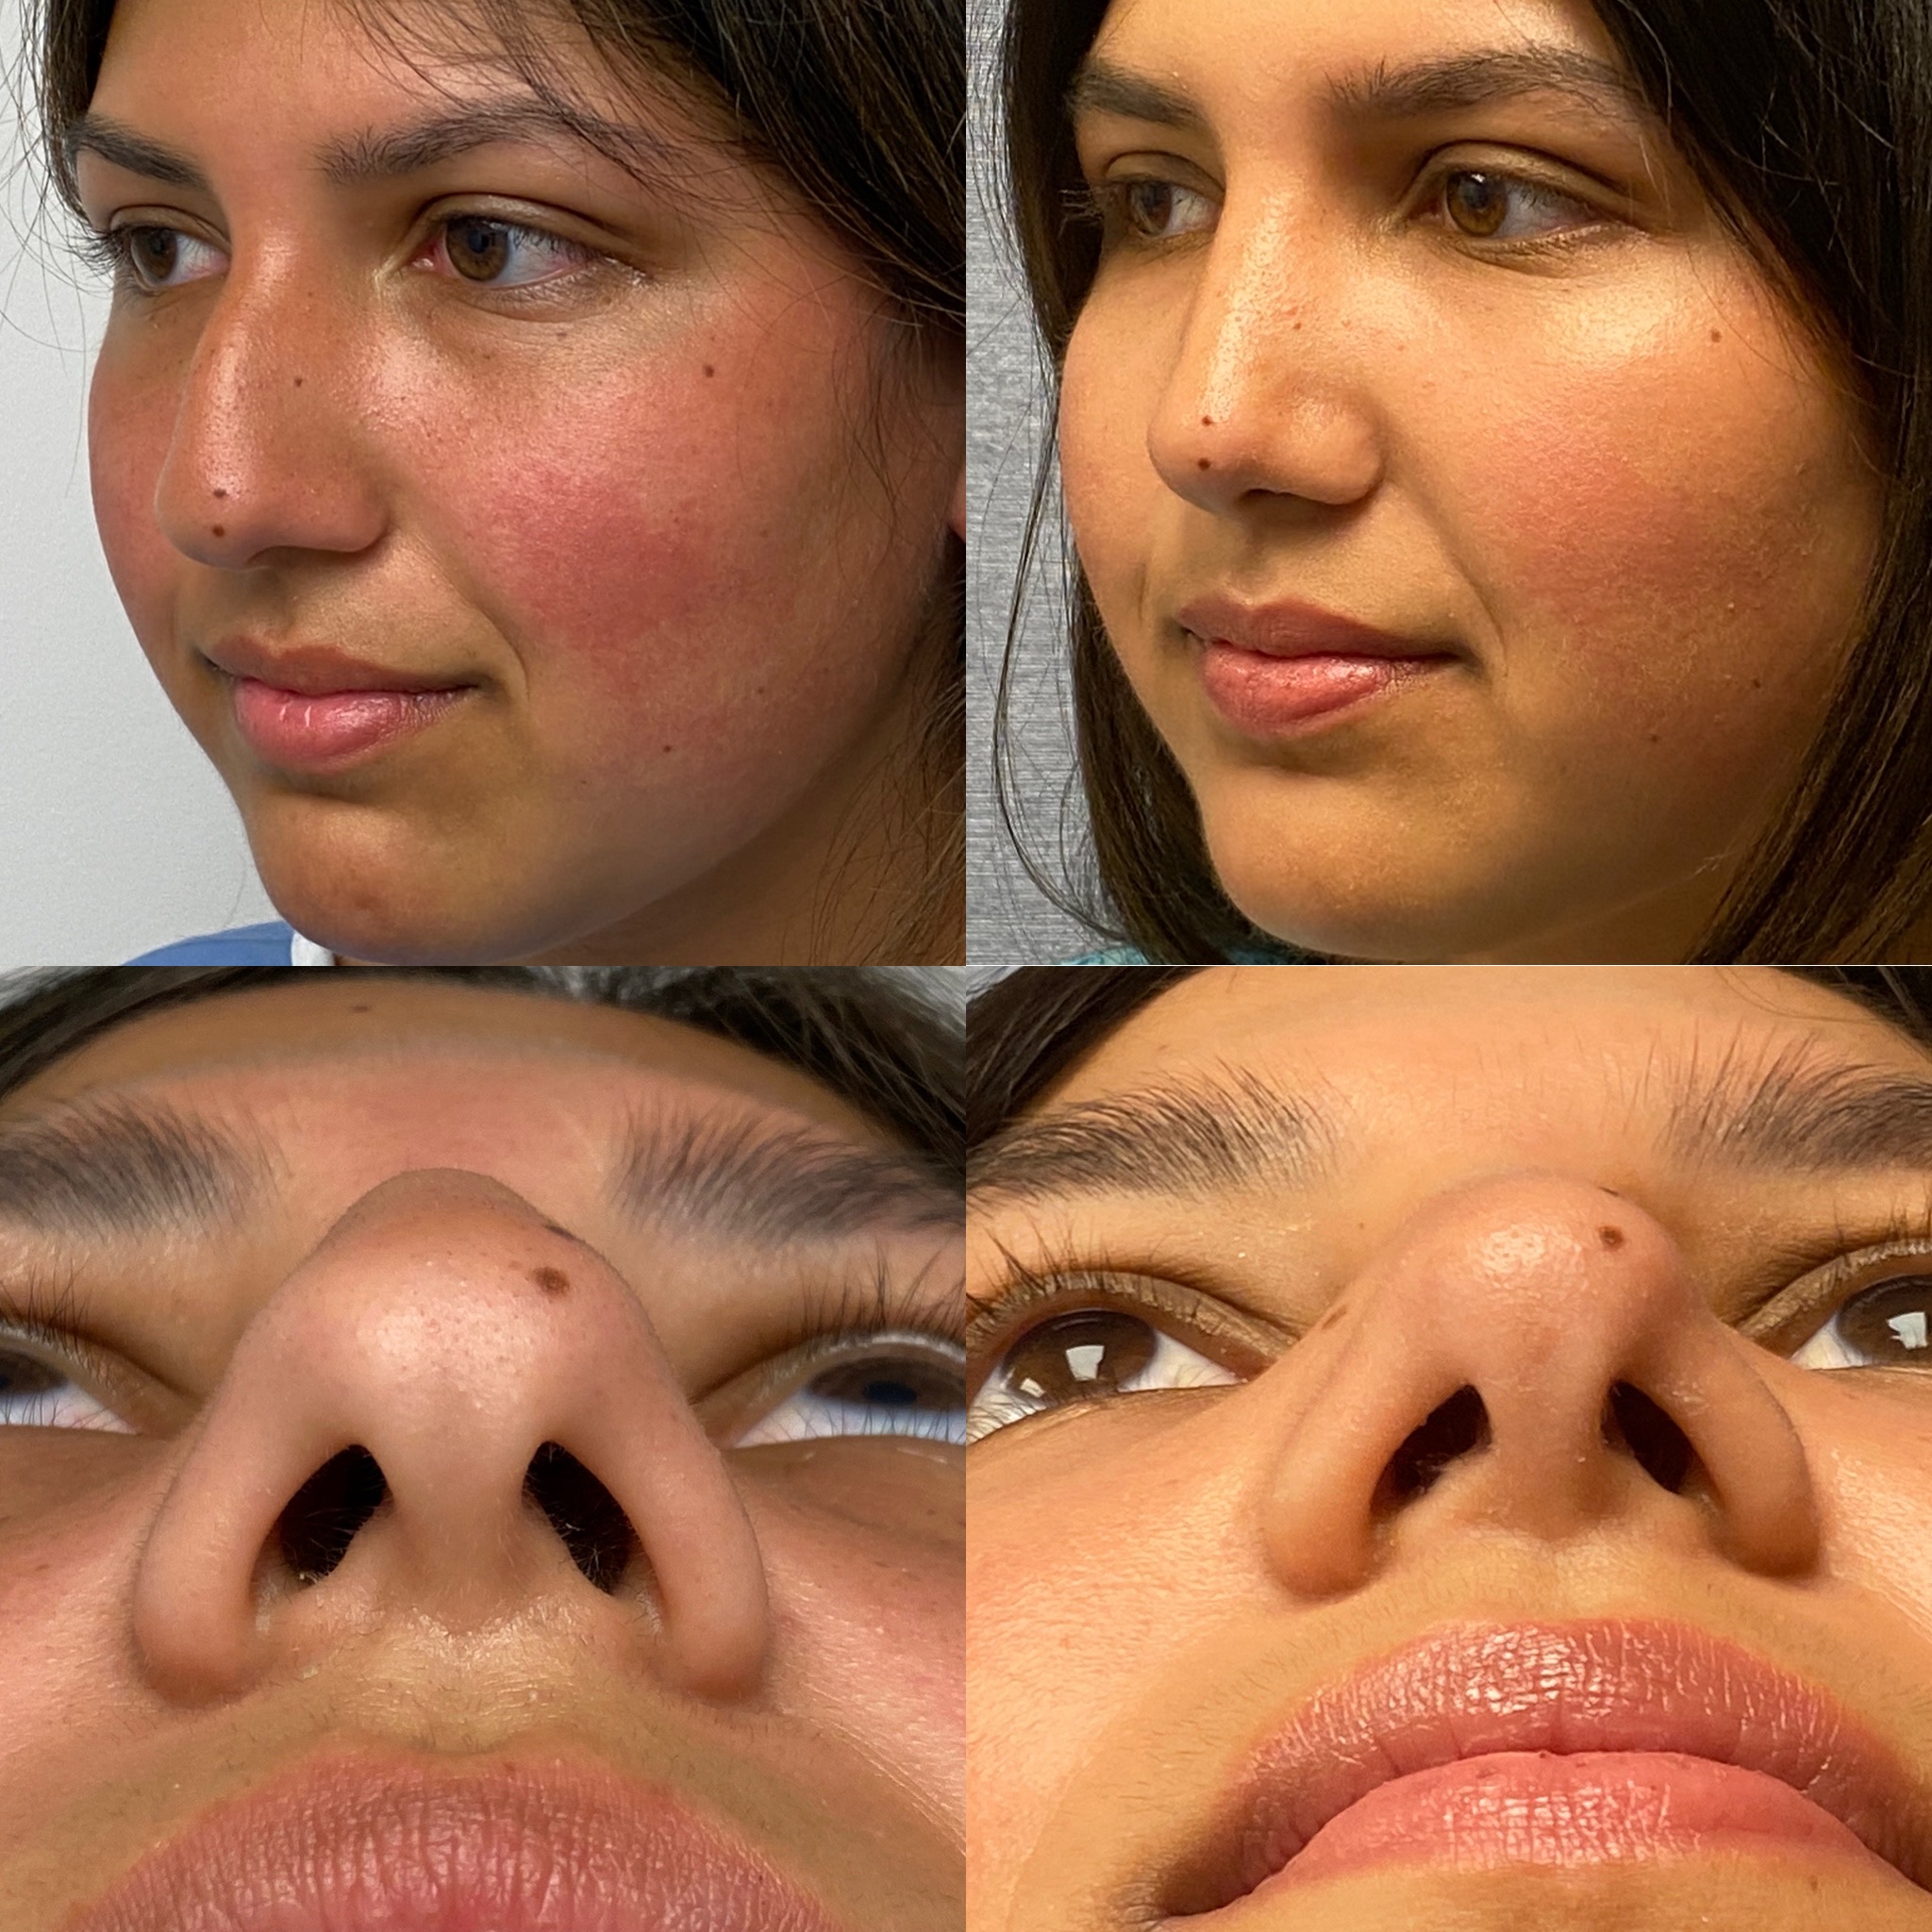 Rhinoplasty - 1 year after sharpening tip and lowering bump. So natural and beautiful.